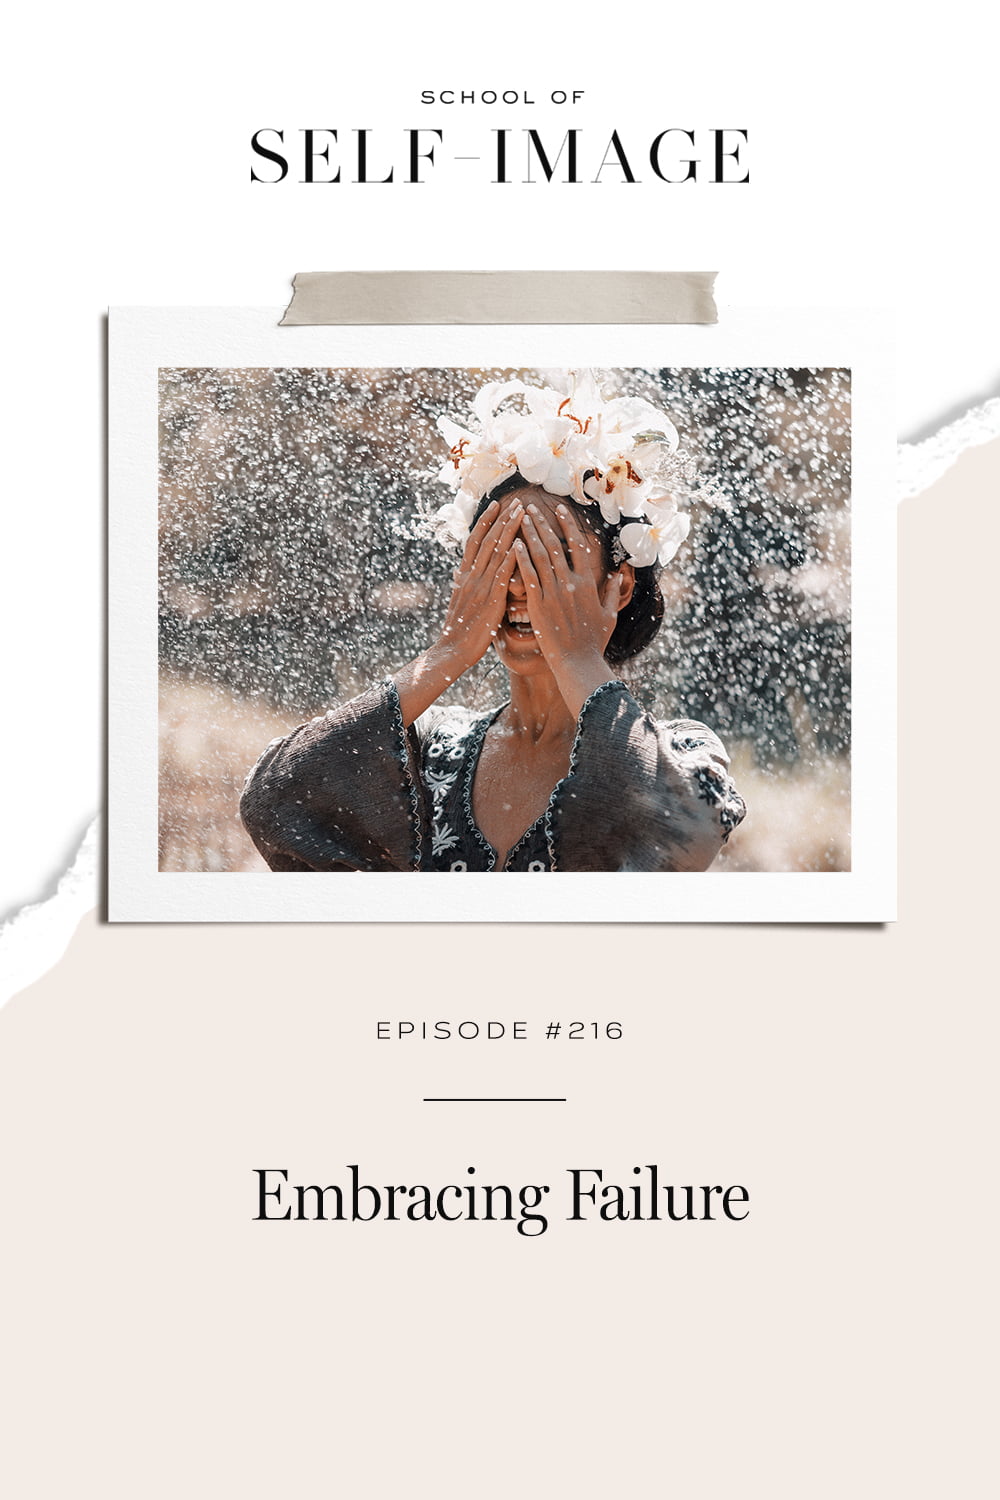 Why embracing failure always increases your chances of succeeding.